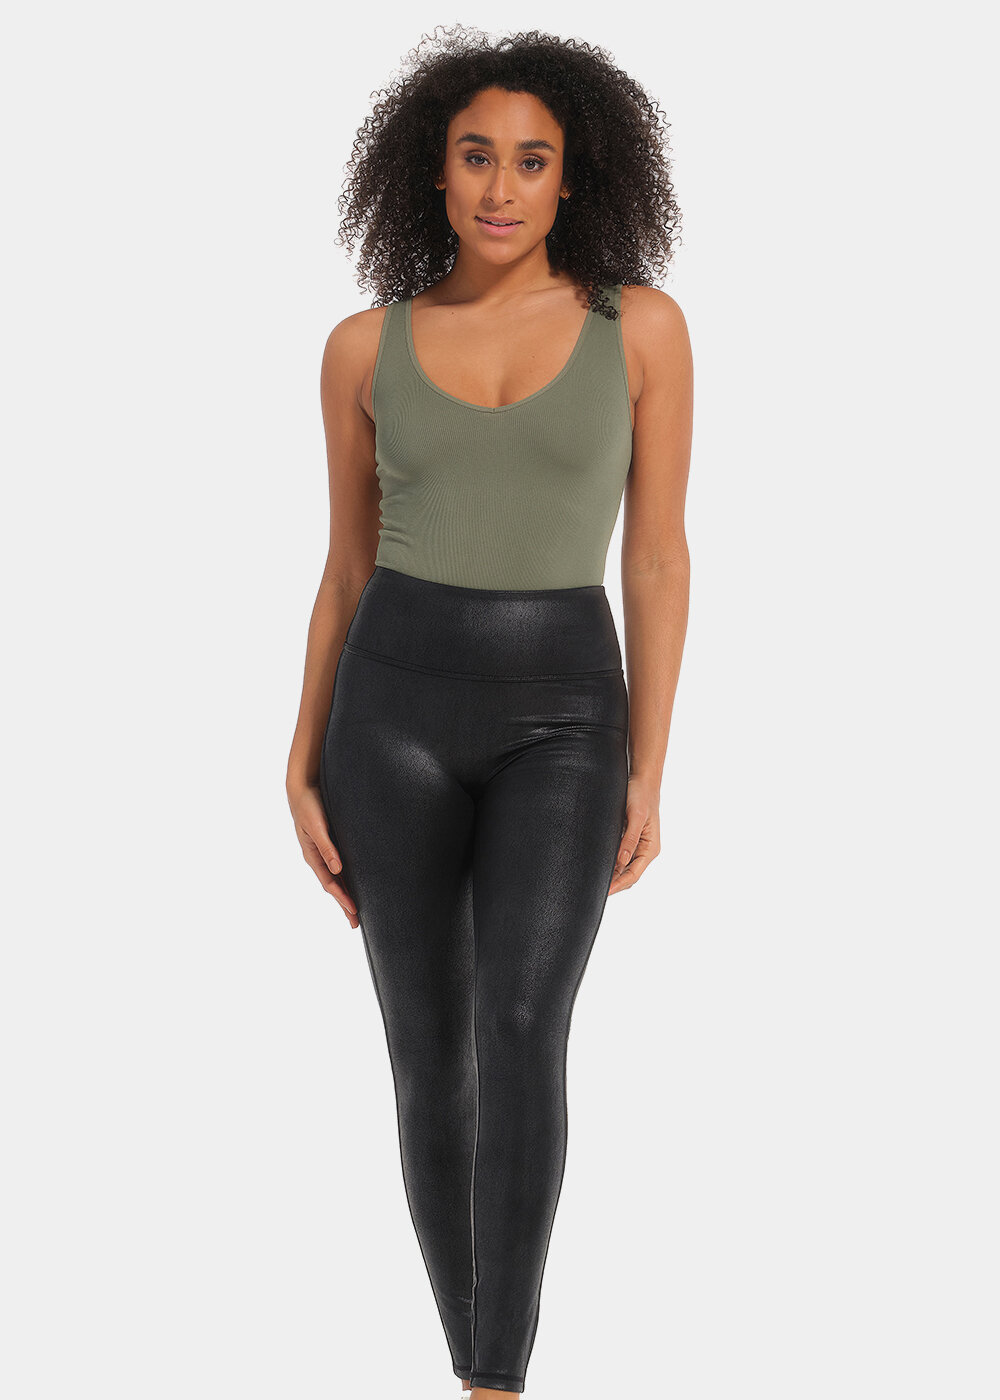 These Faux Leather Pants Work Magic on My Curves and Make My Petite Legs  Look Miles Long